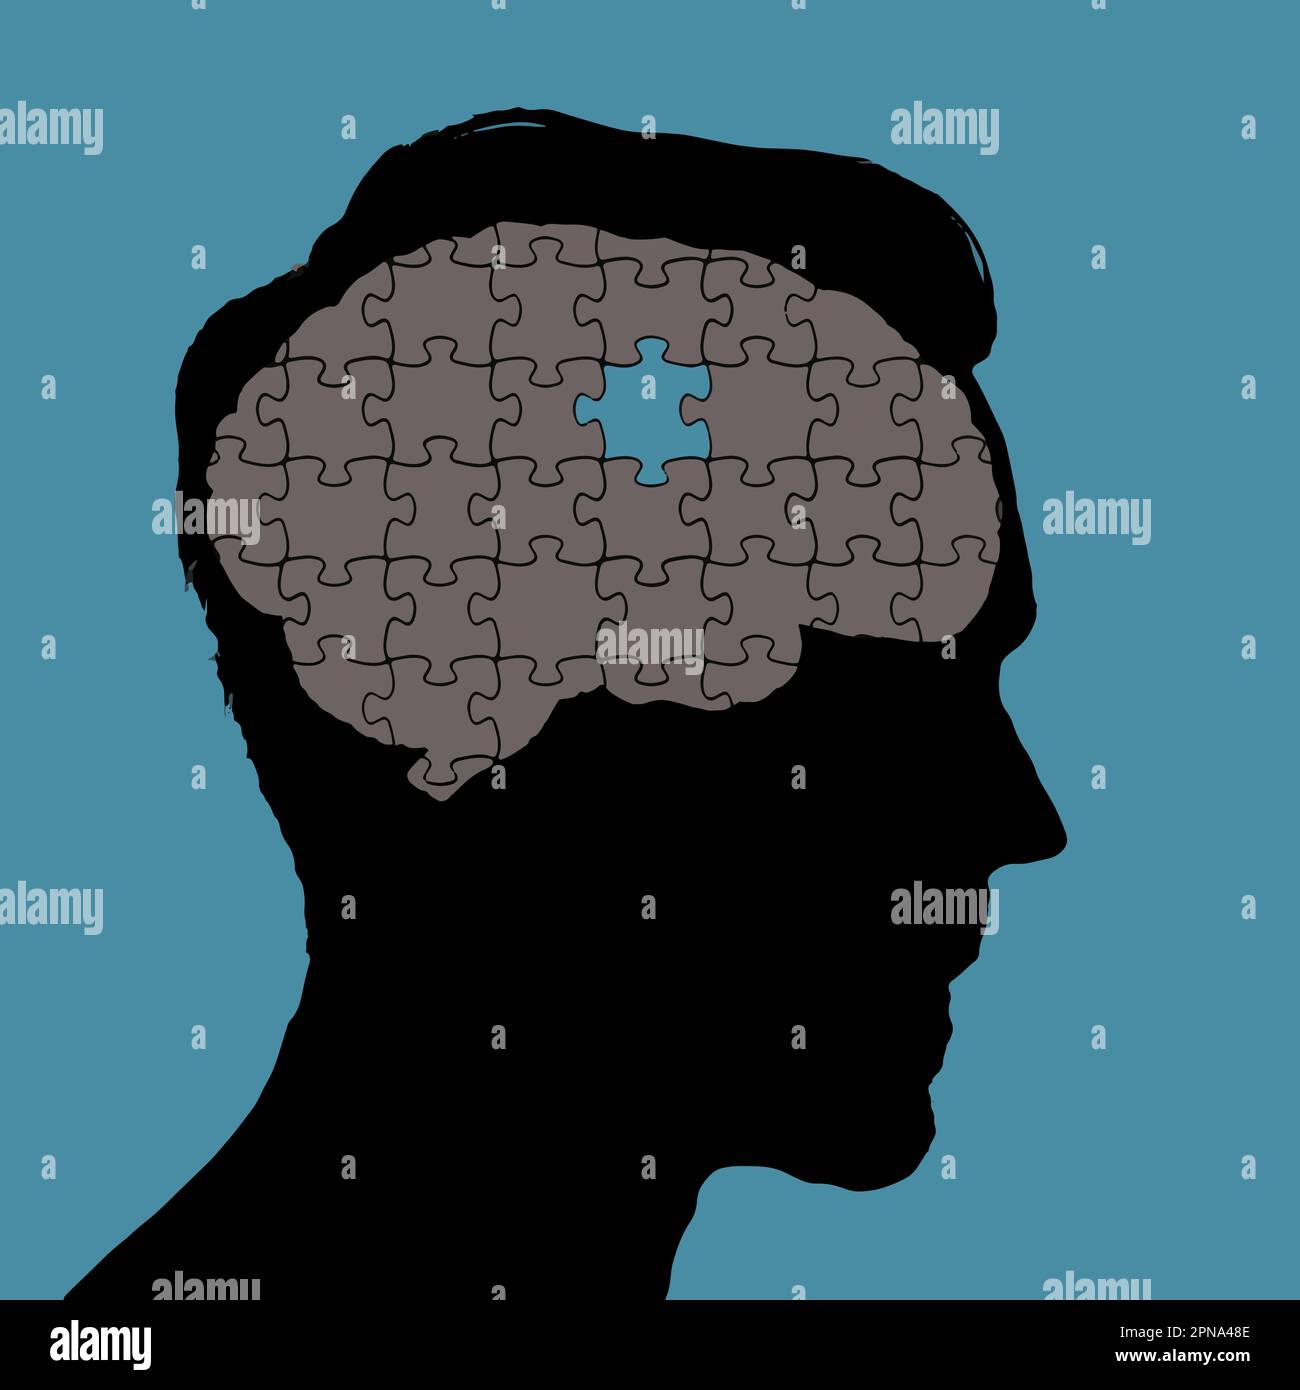 A damaged human brain is pictured as a jigsaw puzzle with a piece missing in a vector illustration. Stock Vector